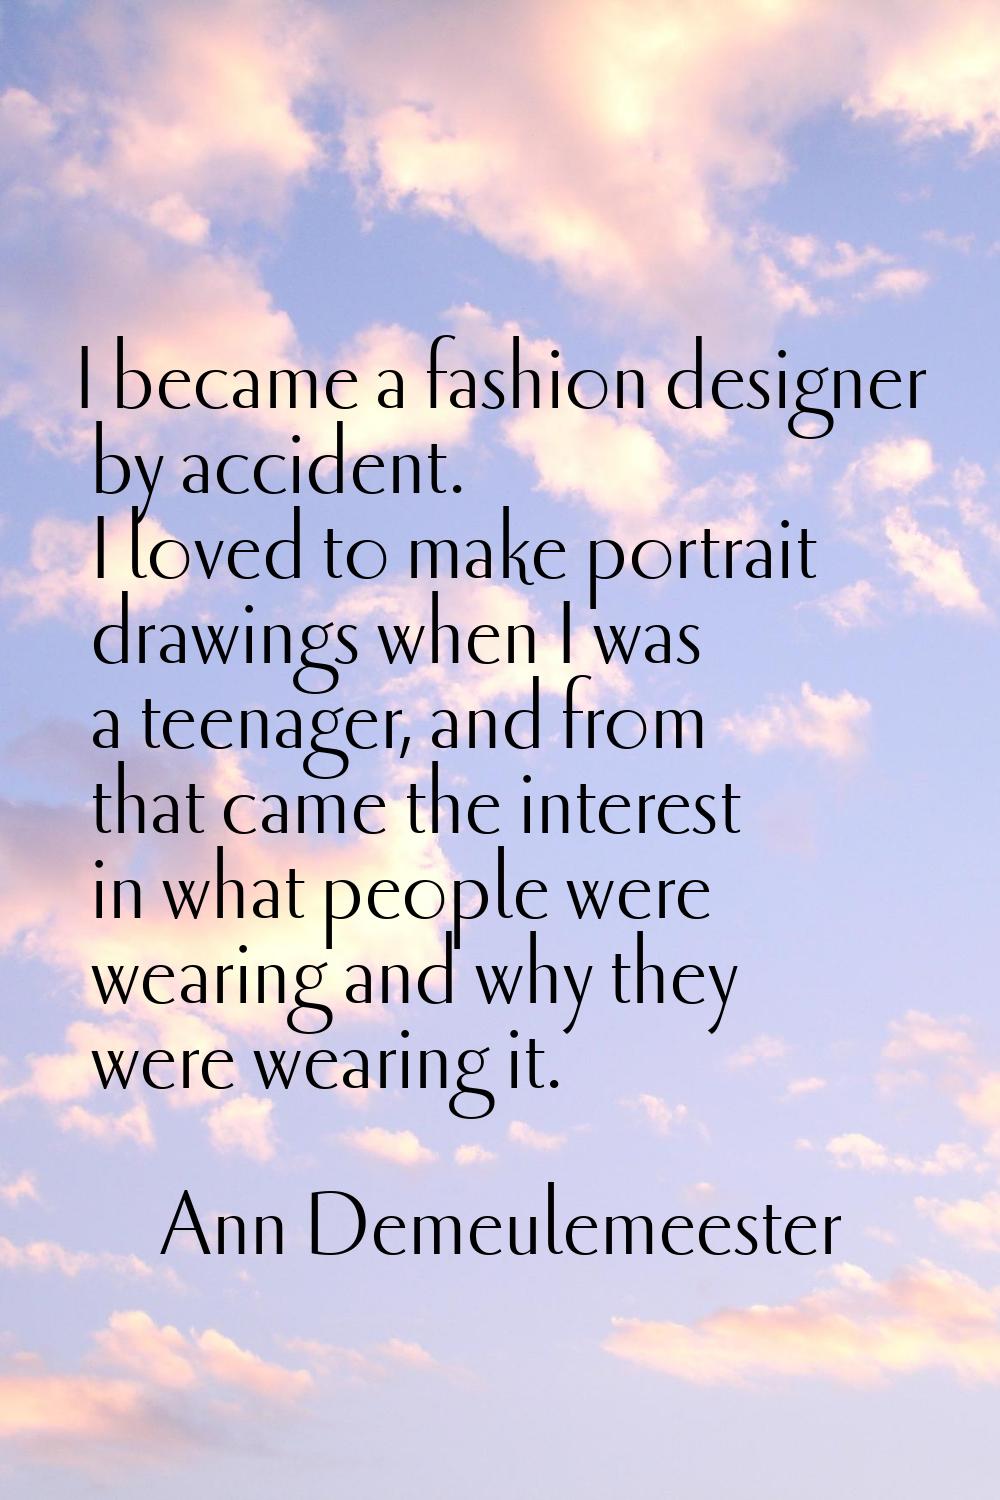 I became a fashion designer by accident. I loved to make portrait drawings when I was a teenager, a